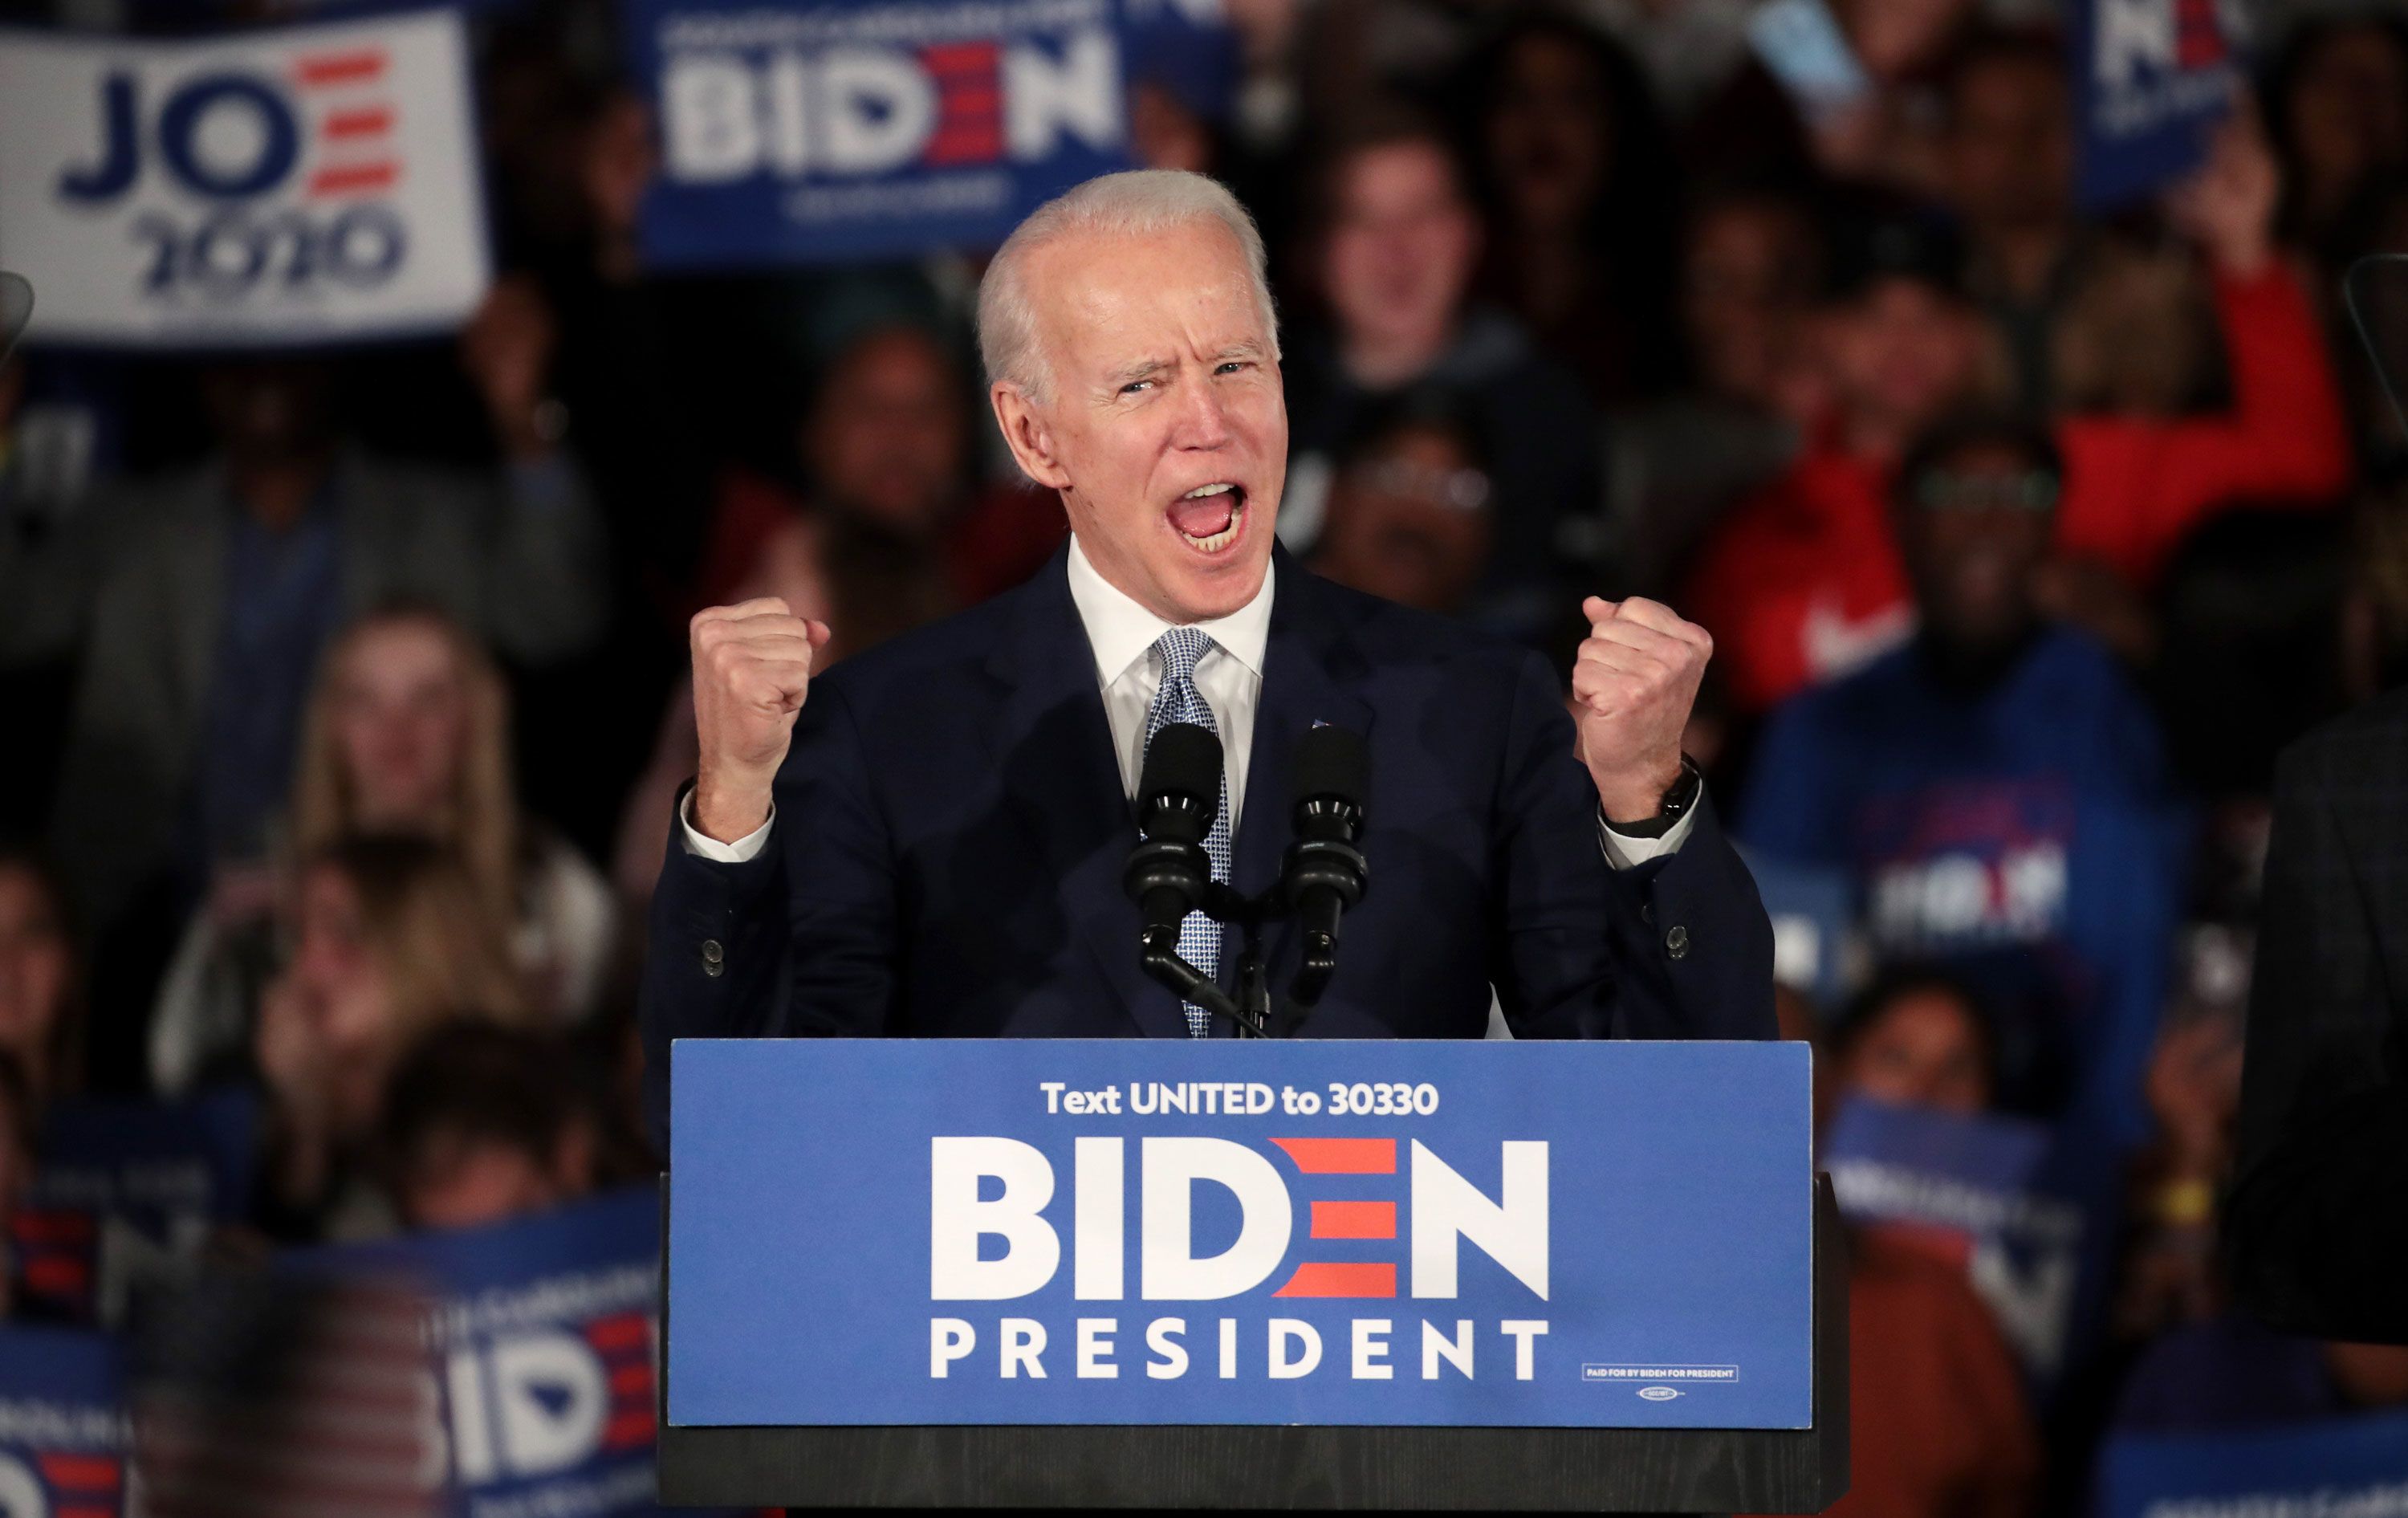 Former Vice President Joe Biden speaks at his primary night event in Columbia, South Carolina, on Saturday. His victory in the Palmetto State is his first-ever win in a presidential primary.